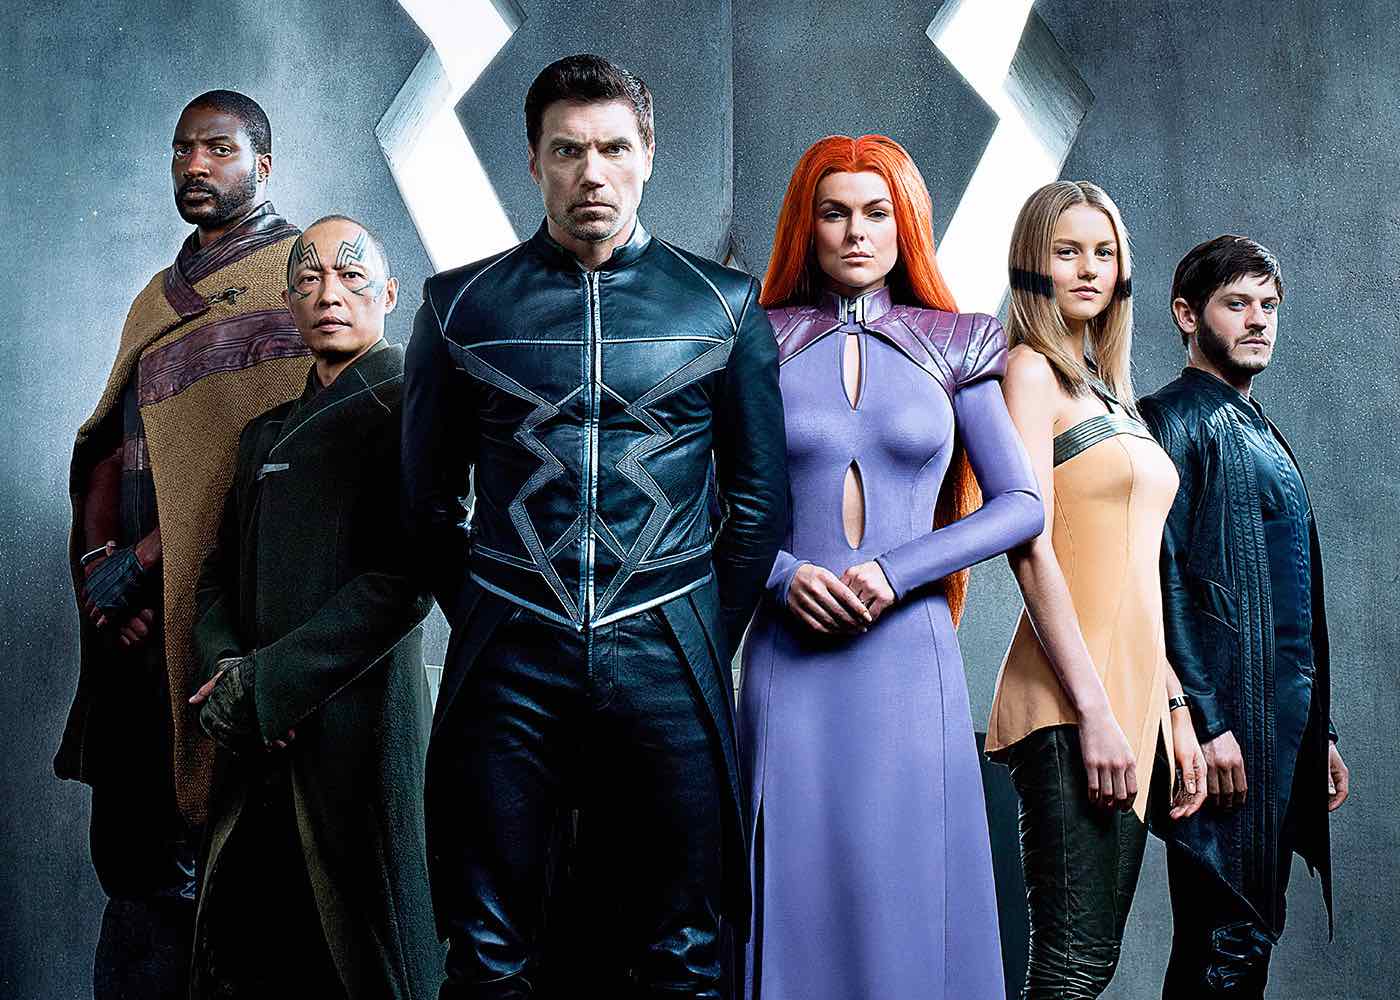 Meet the Inhumans in New Action-Packed Trailer